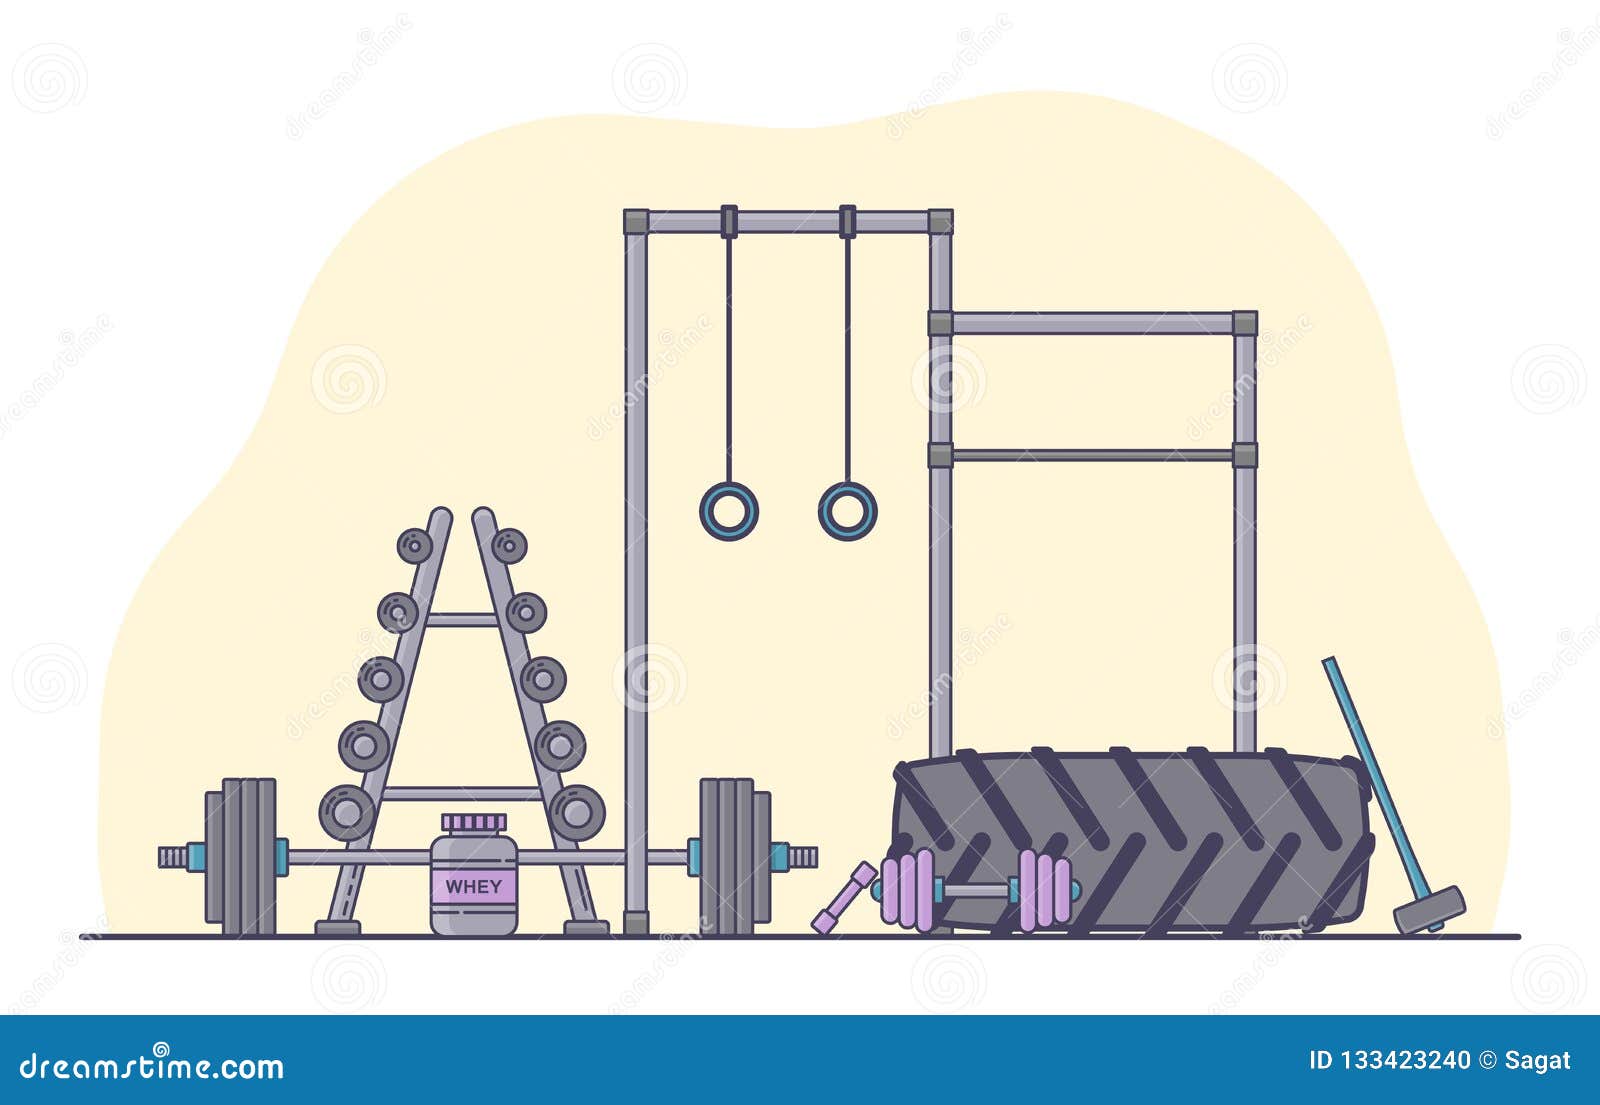 https://thumbs.dreamstime.com/z/gym-equipment-set-various-fitness-accessories-collection-bodybuilding-crossfit-equipement-isolated-flat-style-vector-133423240.jpg